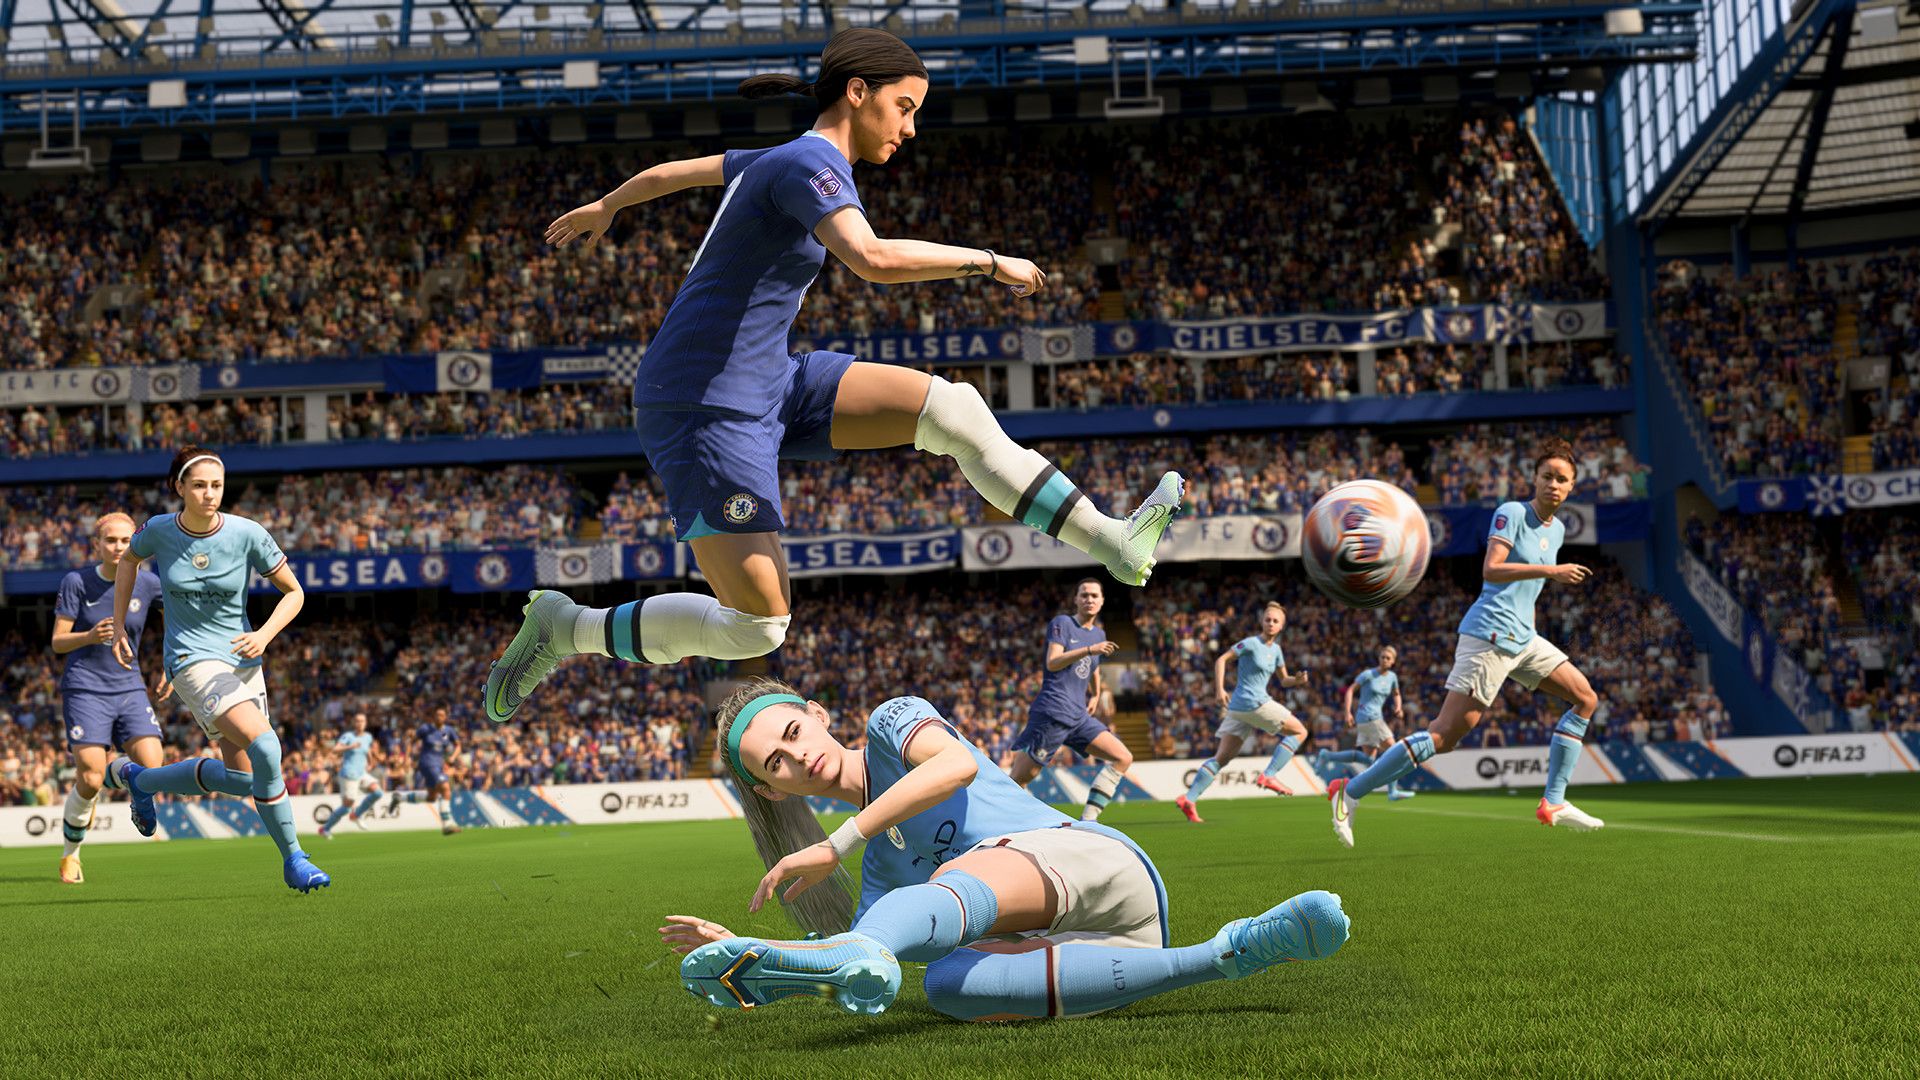 In this article, we are going to be covering FIFA 23 Heroes ratings, their rating, nationality, league, and position, so you know all there is about them.